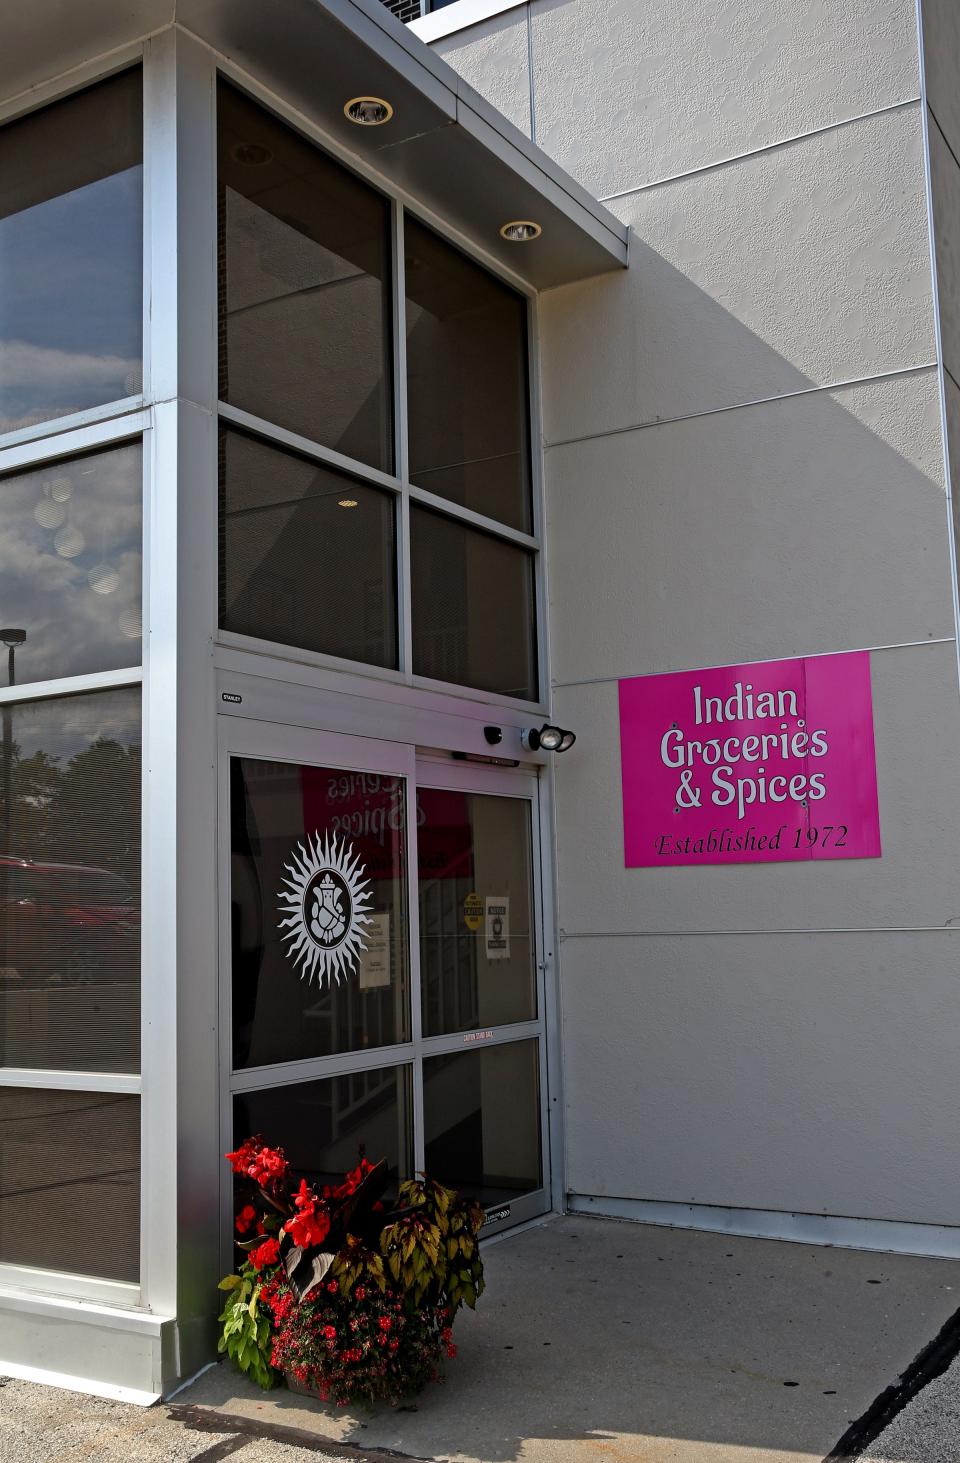 Indian Groceries and Spices, at 10701 W. North Ave. in Wauwatosa, has an entrance and parking behind the building.